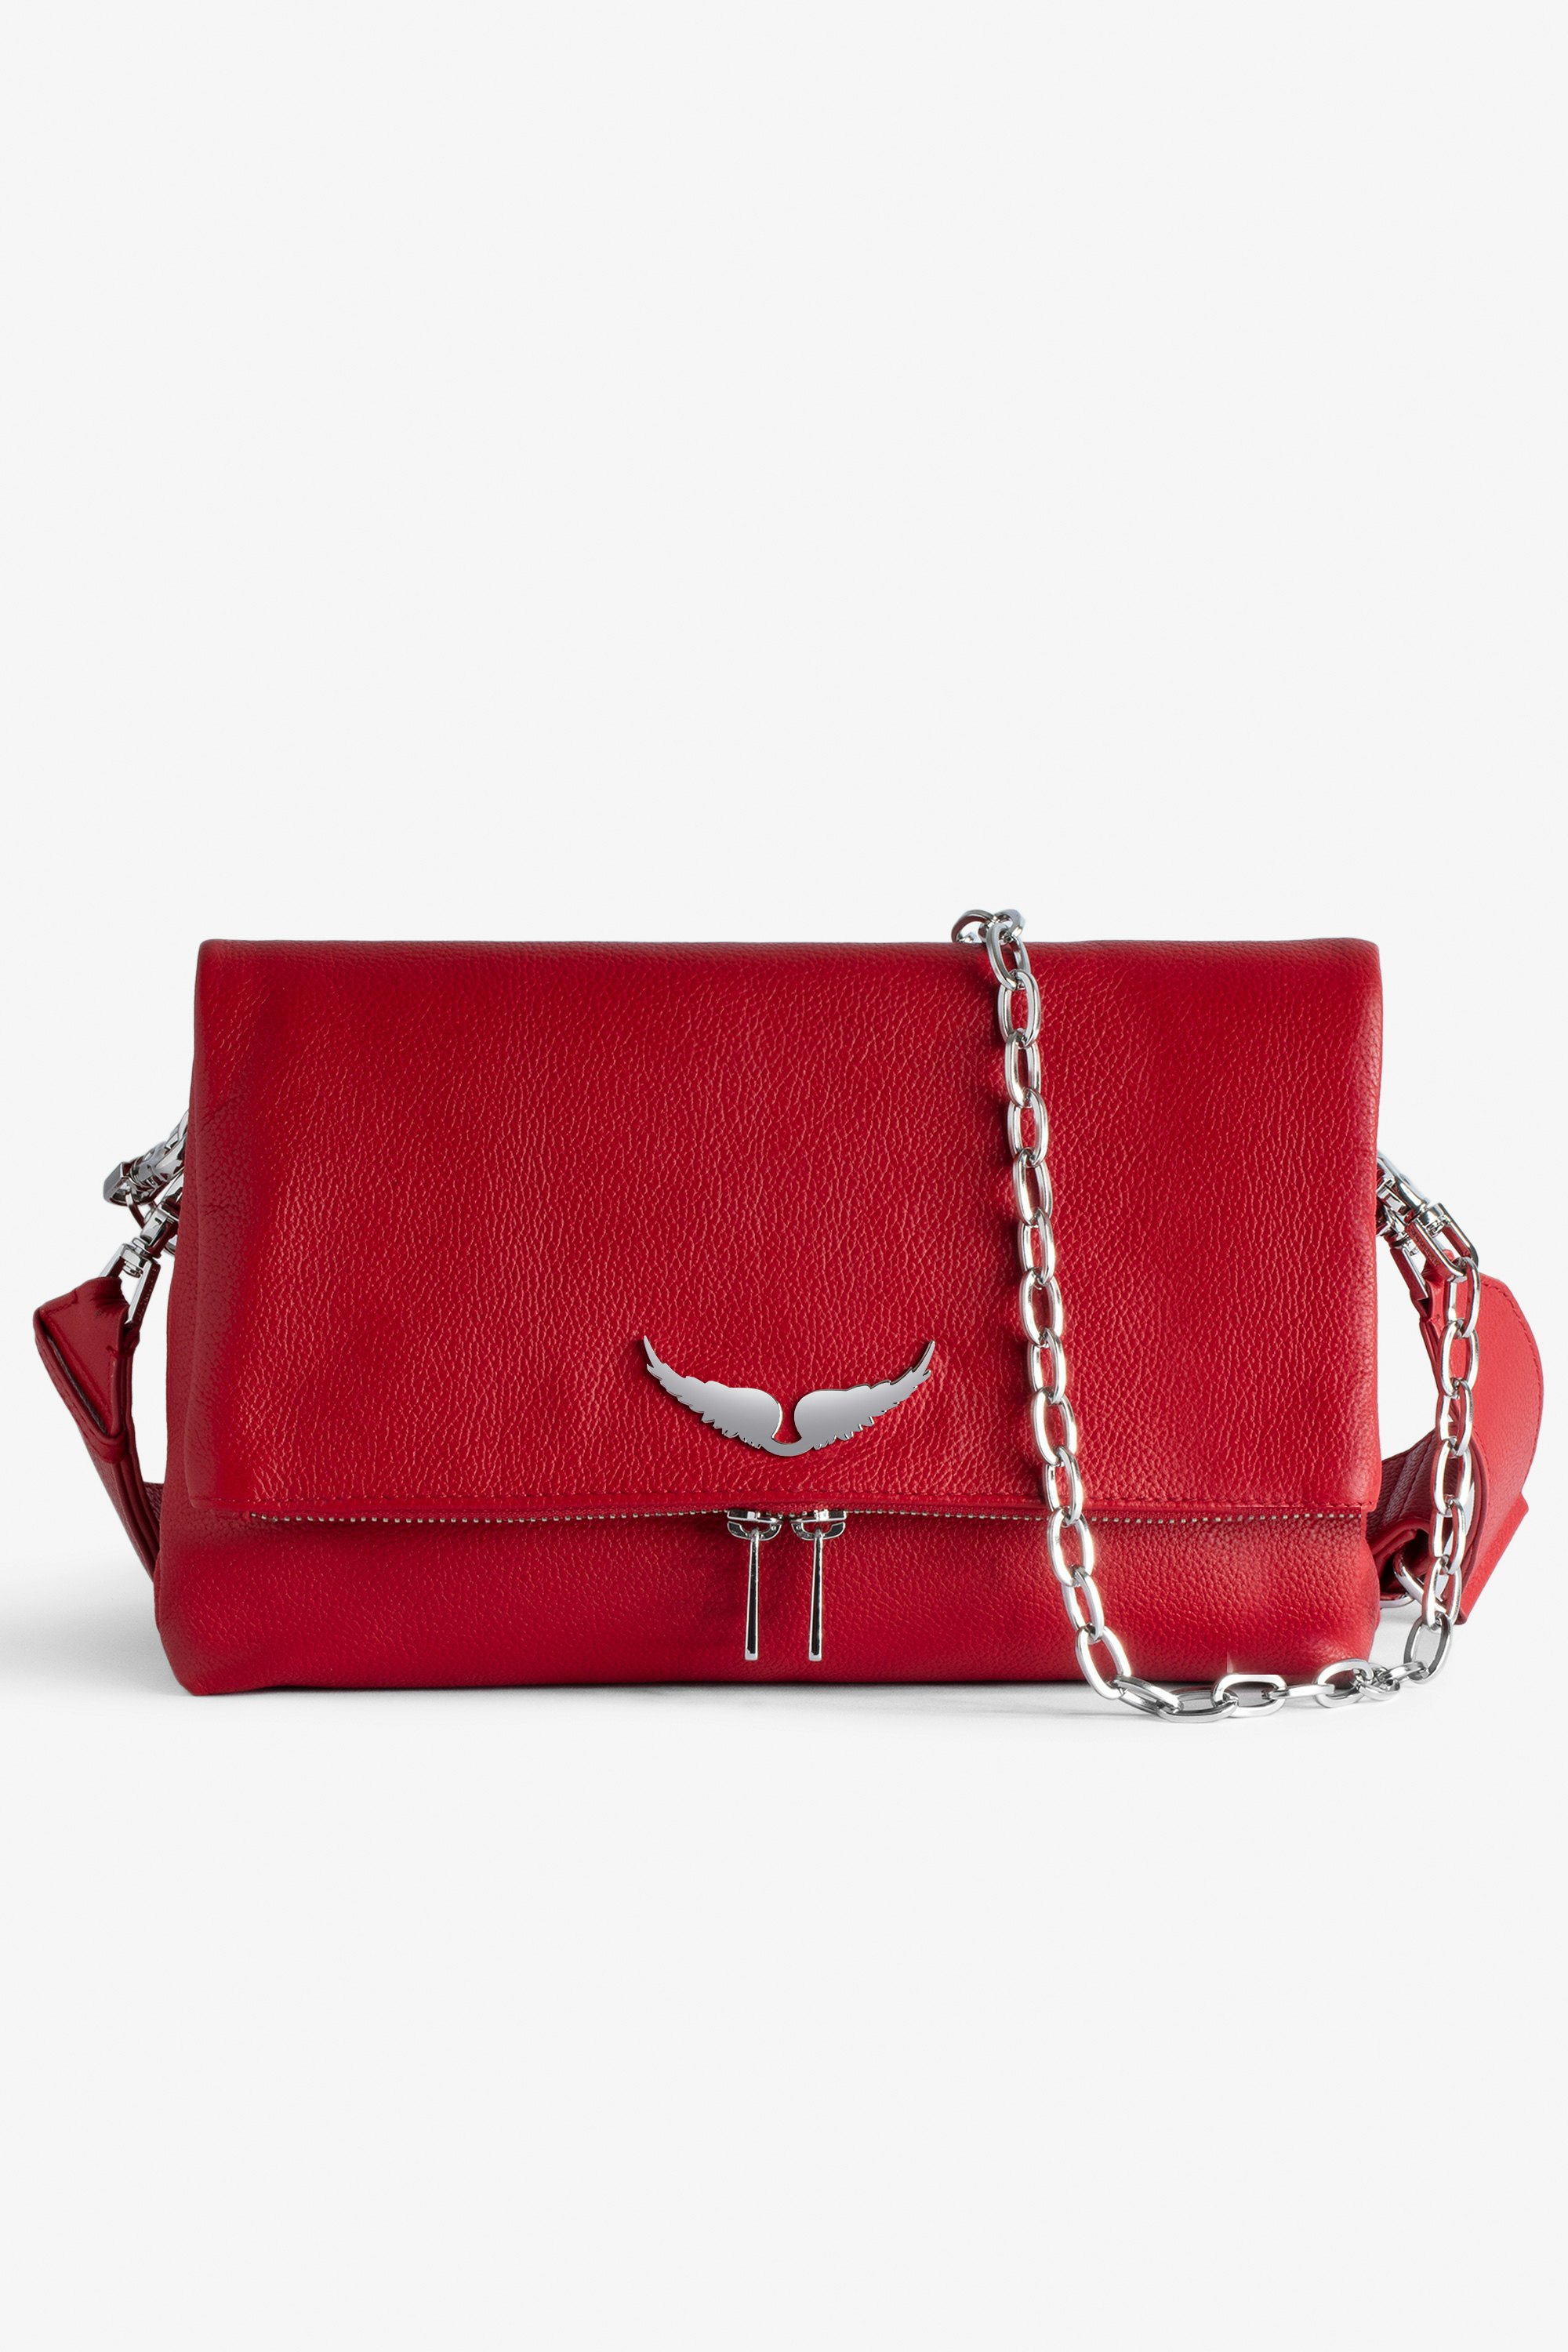 Rocky Bag - Women’s red grained leather bag with shoulder strap and wings charm